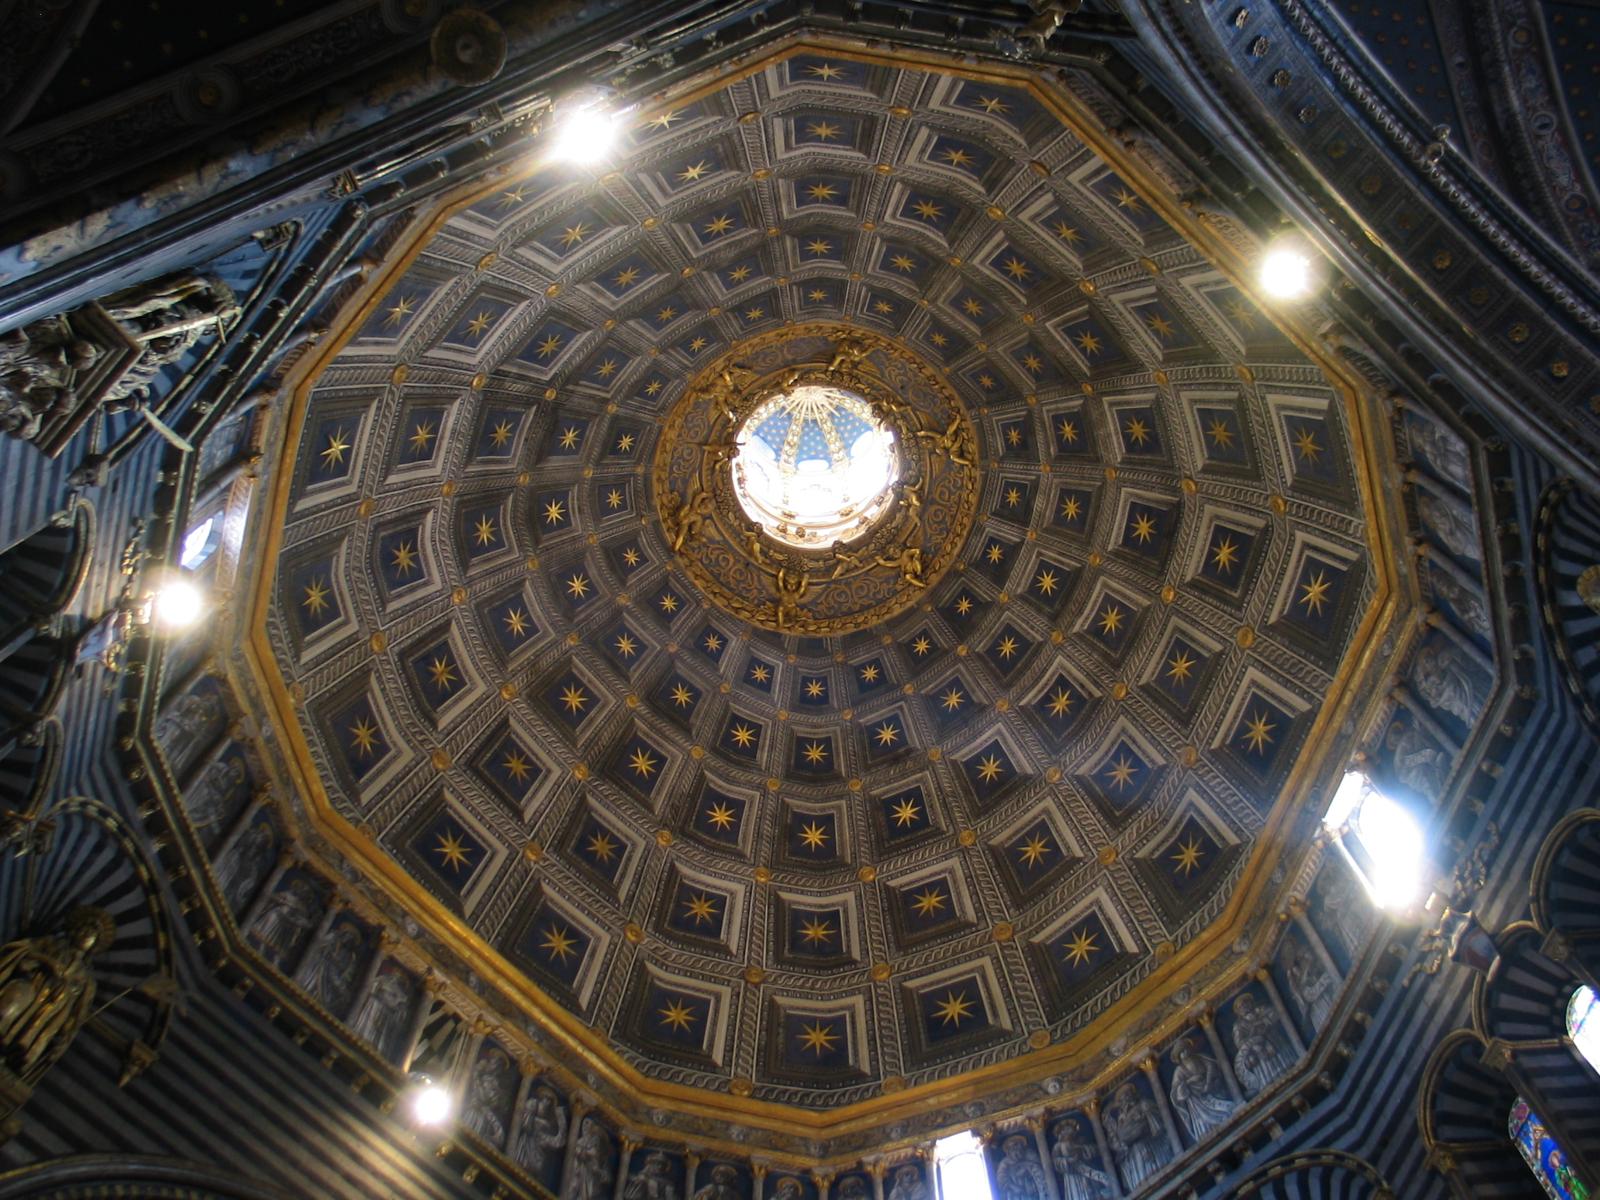 The dome of the Duomo